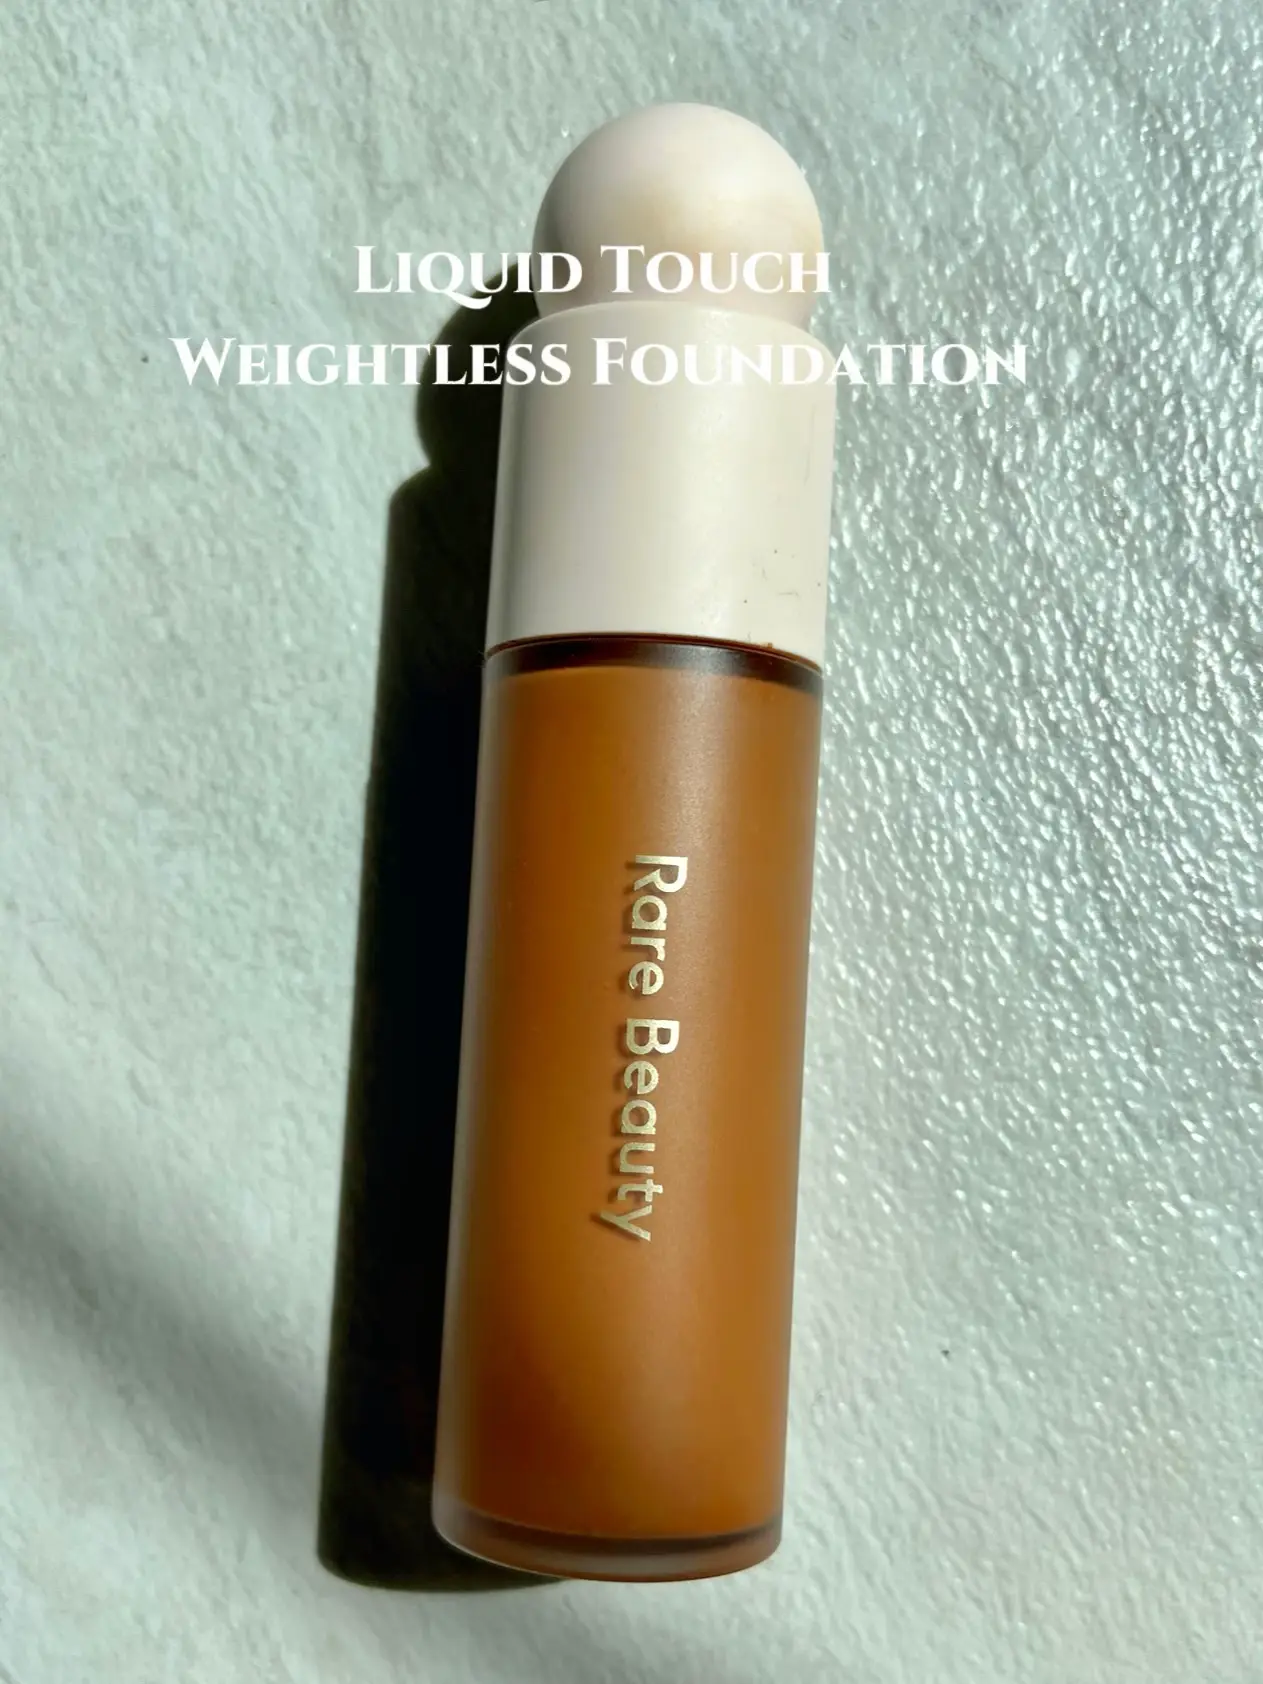 Liquid Touch Weightless Foundation by RARE BEAUTY